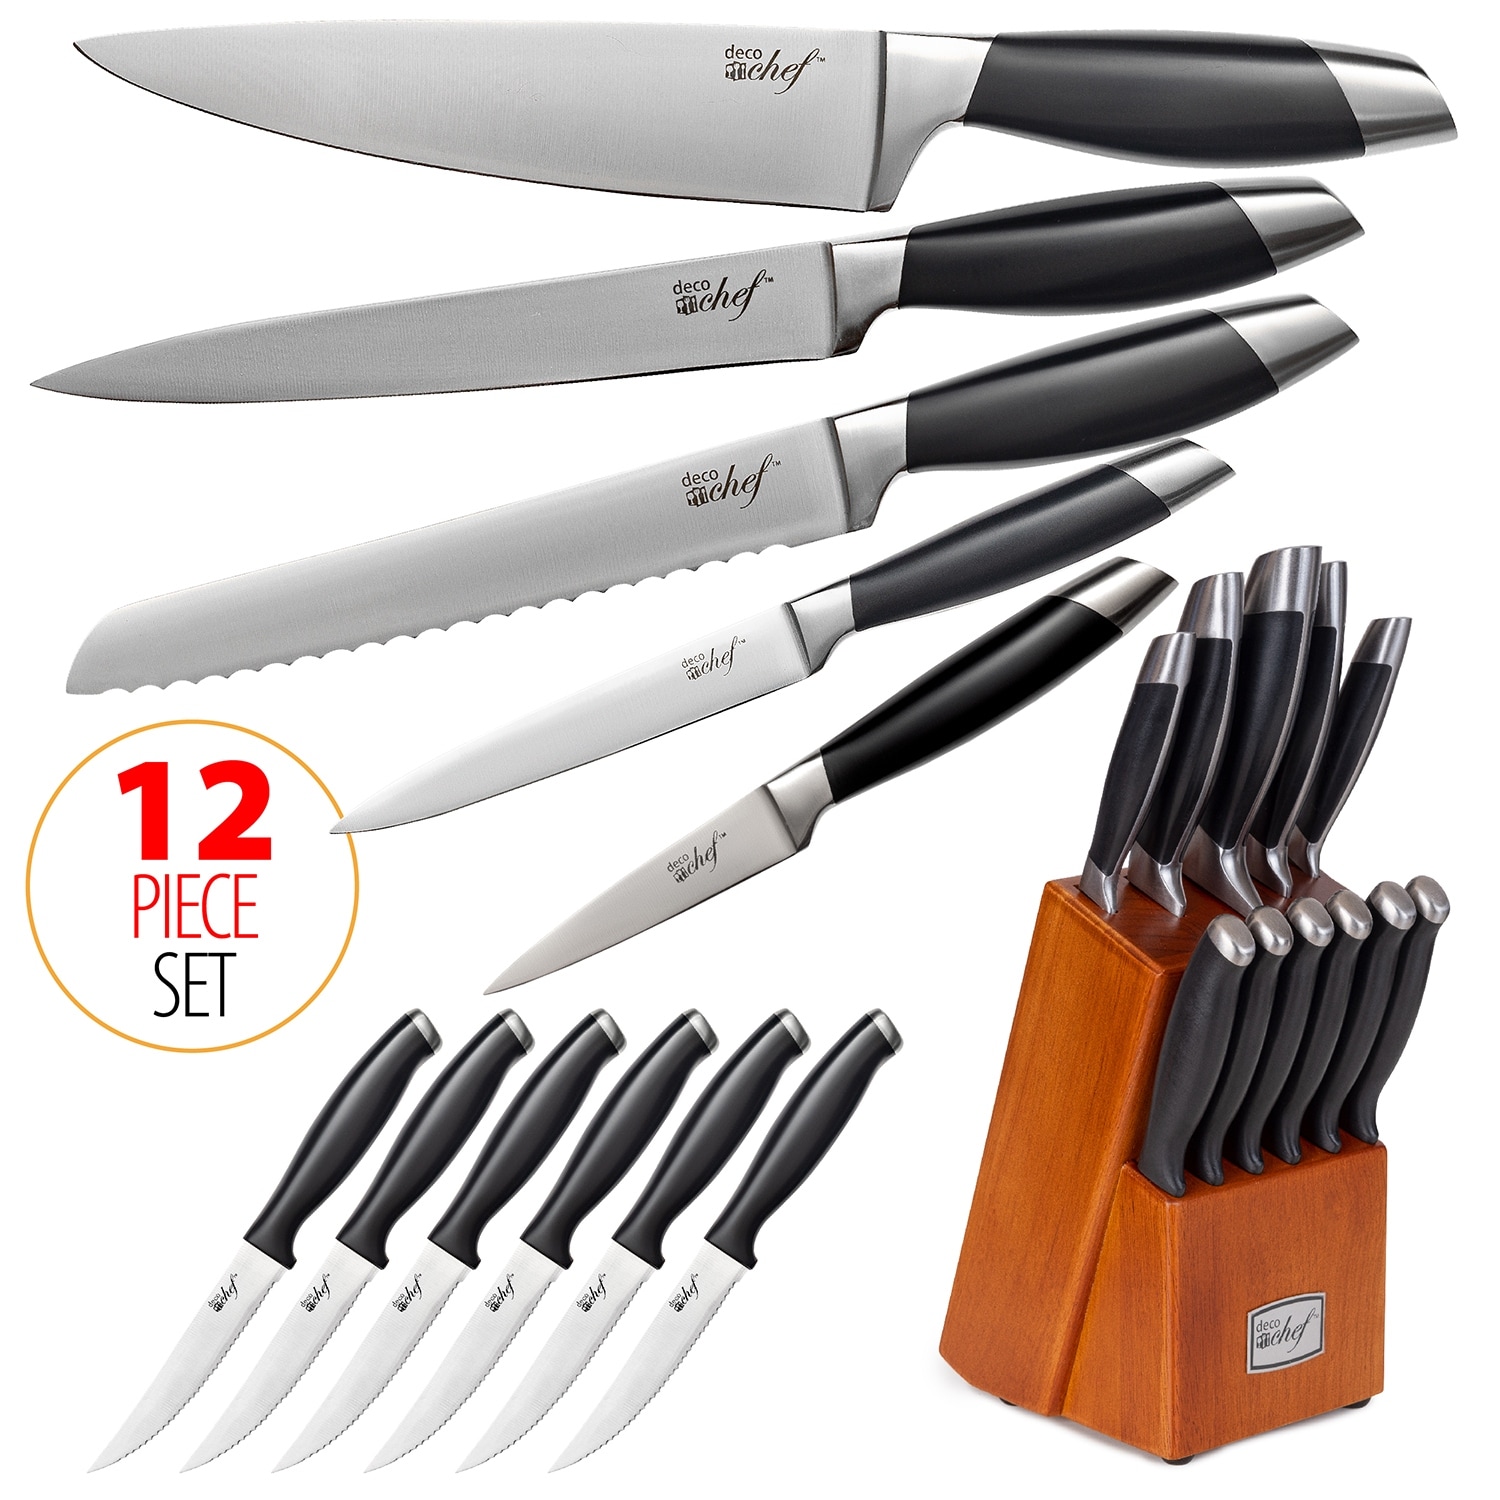 https://ak1.ostkcdn.com/images/products/is/images/direct/370e26f2c20961d87f3fc34d00a7a7d7729450ed/Deco-Chef-Gourmet-12-Piece-Stainless-Steel-Knife-Set-with-Storage-Block---Full-Tang-Design.jpg